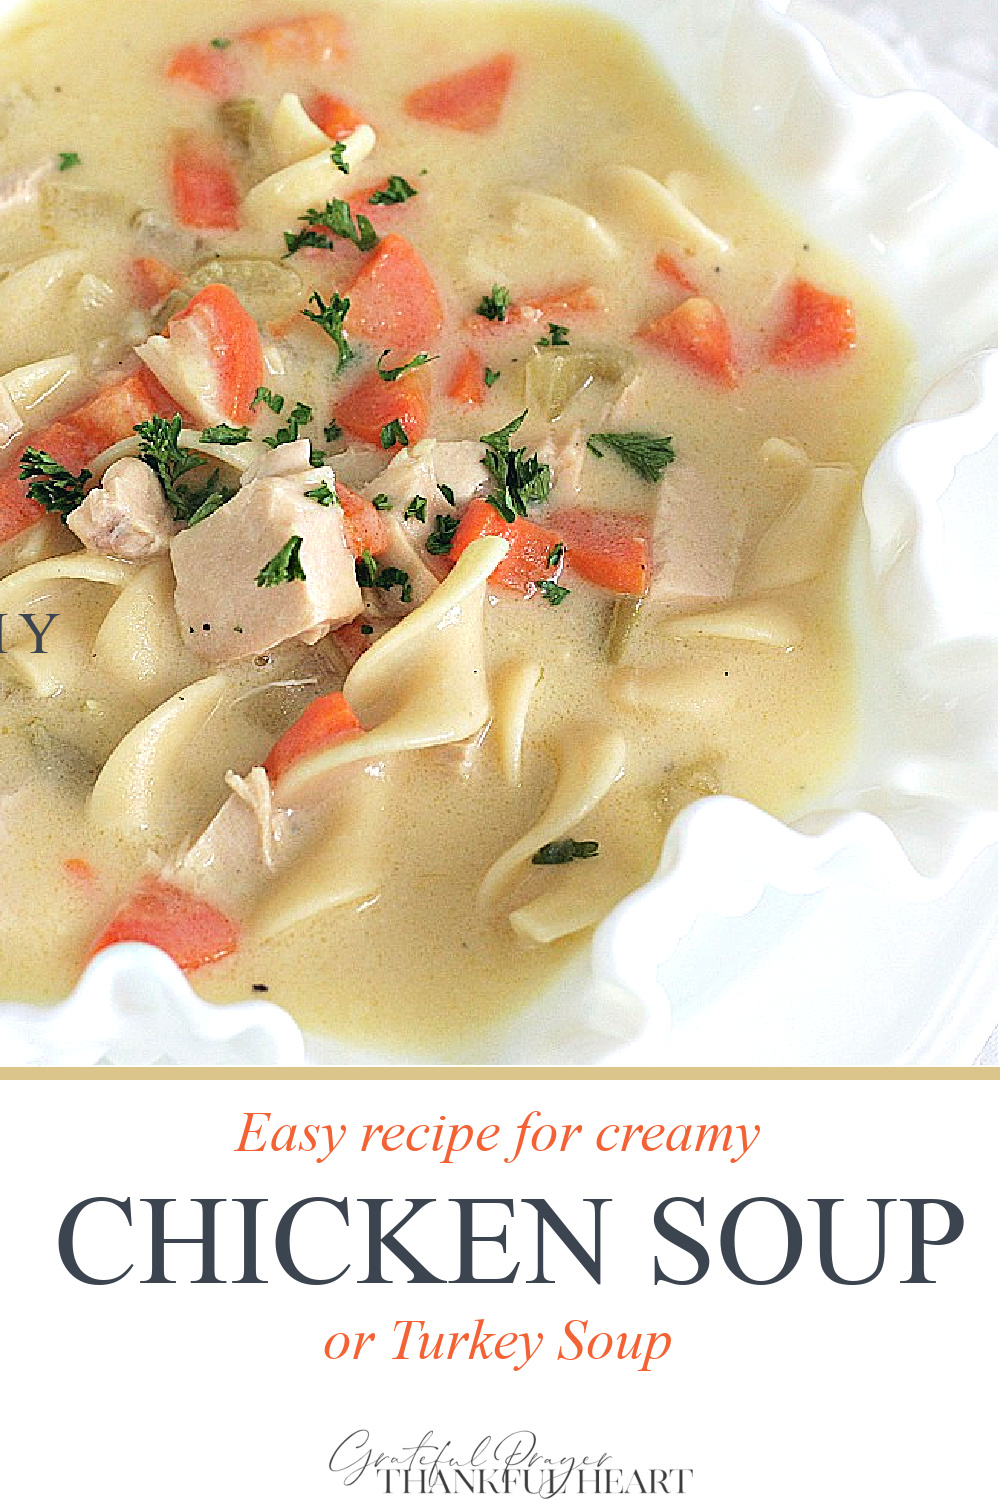 Easy recipe for creamy chicken soup full of carrots, onion and celery. Finish with cream, chunks of chicken or turkey and egg noodles.